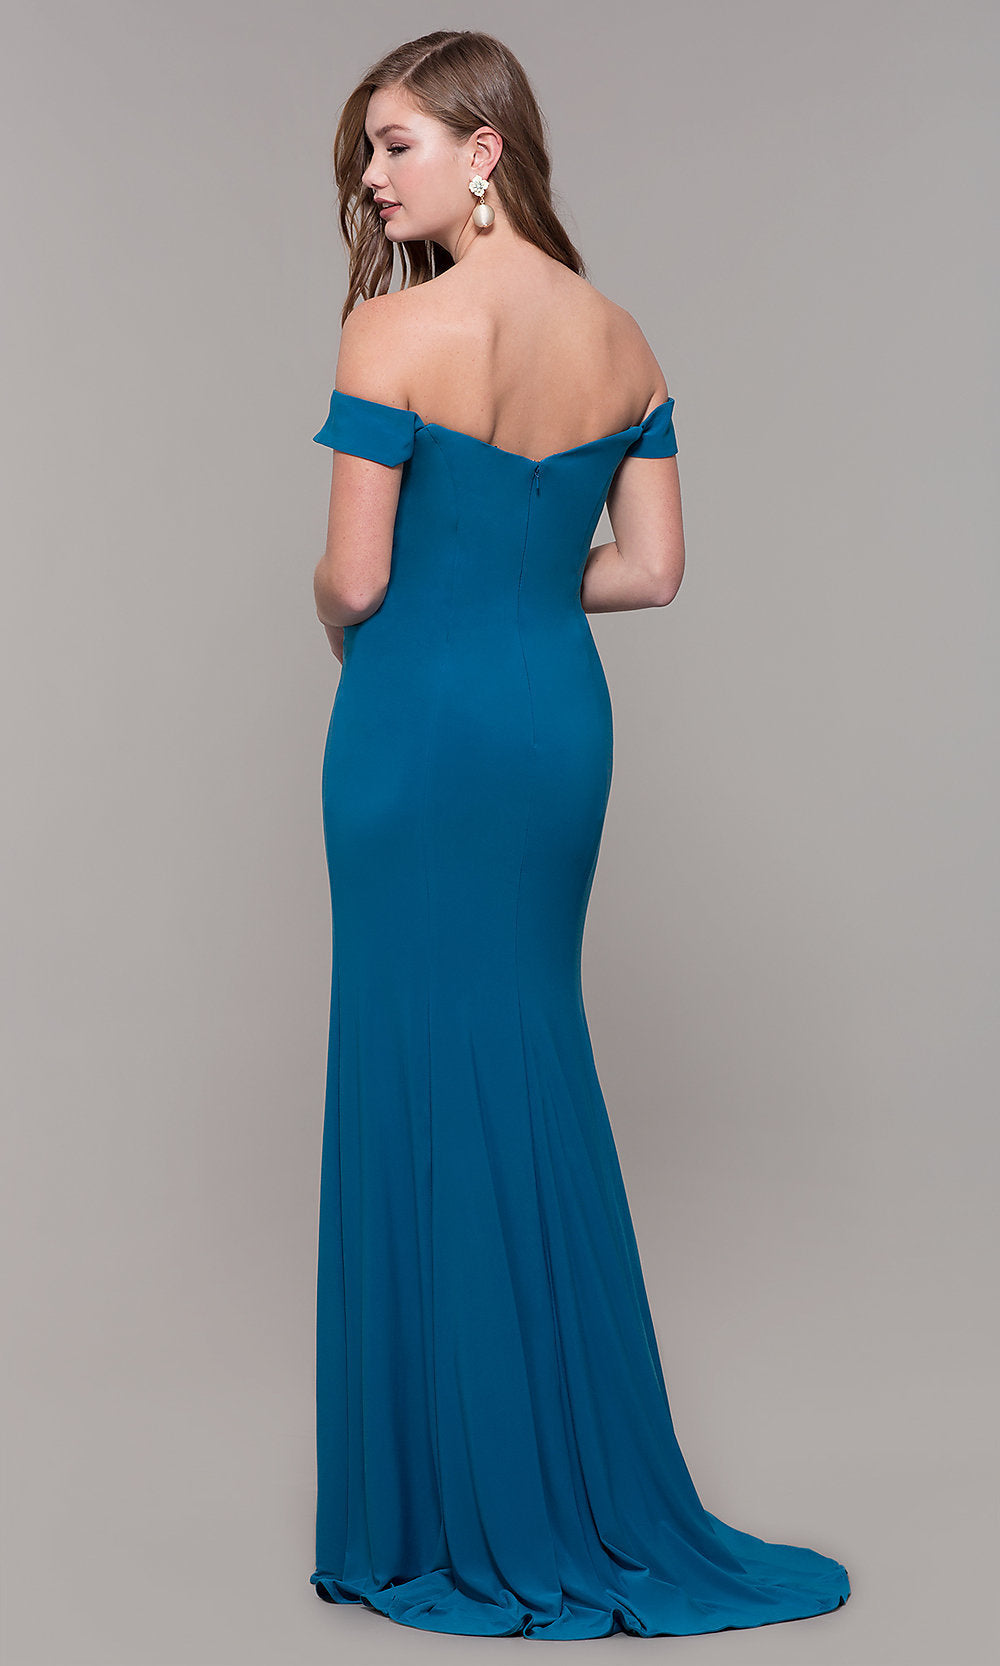 Long Off-the-Shoulder Sweetheart Prom Dress